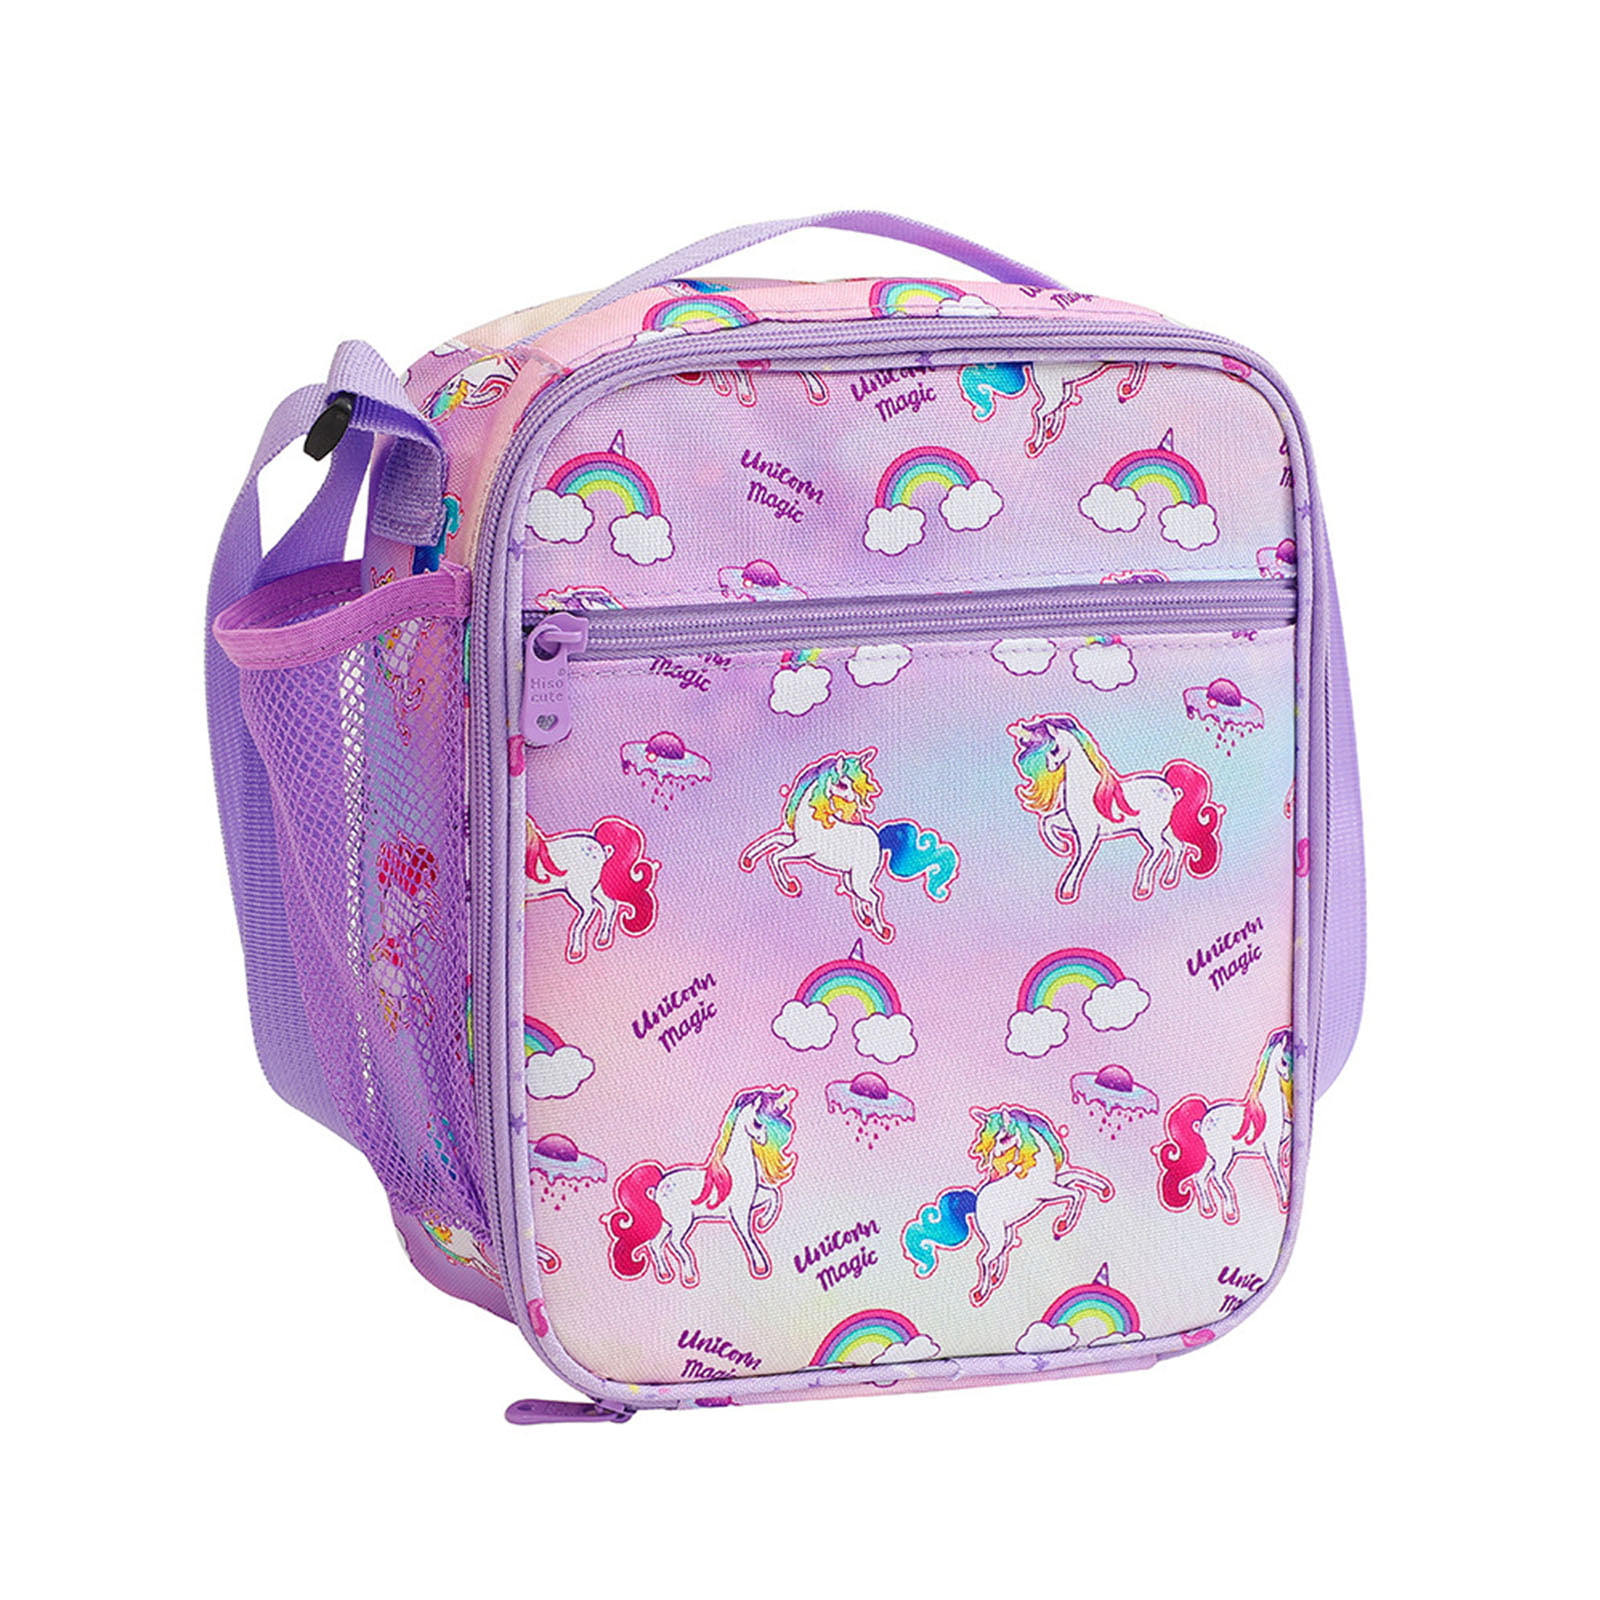 JOY2B Kids Lunch Bag - Insulated Unicorn Lunch Bag Kids with Water Bottle  Holder - Reusable Snack Ba…See more JOY2B Kids Lunch Bag - Insulated  Unicorn